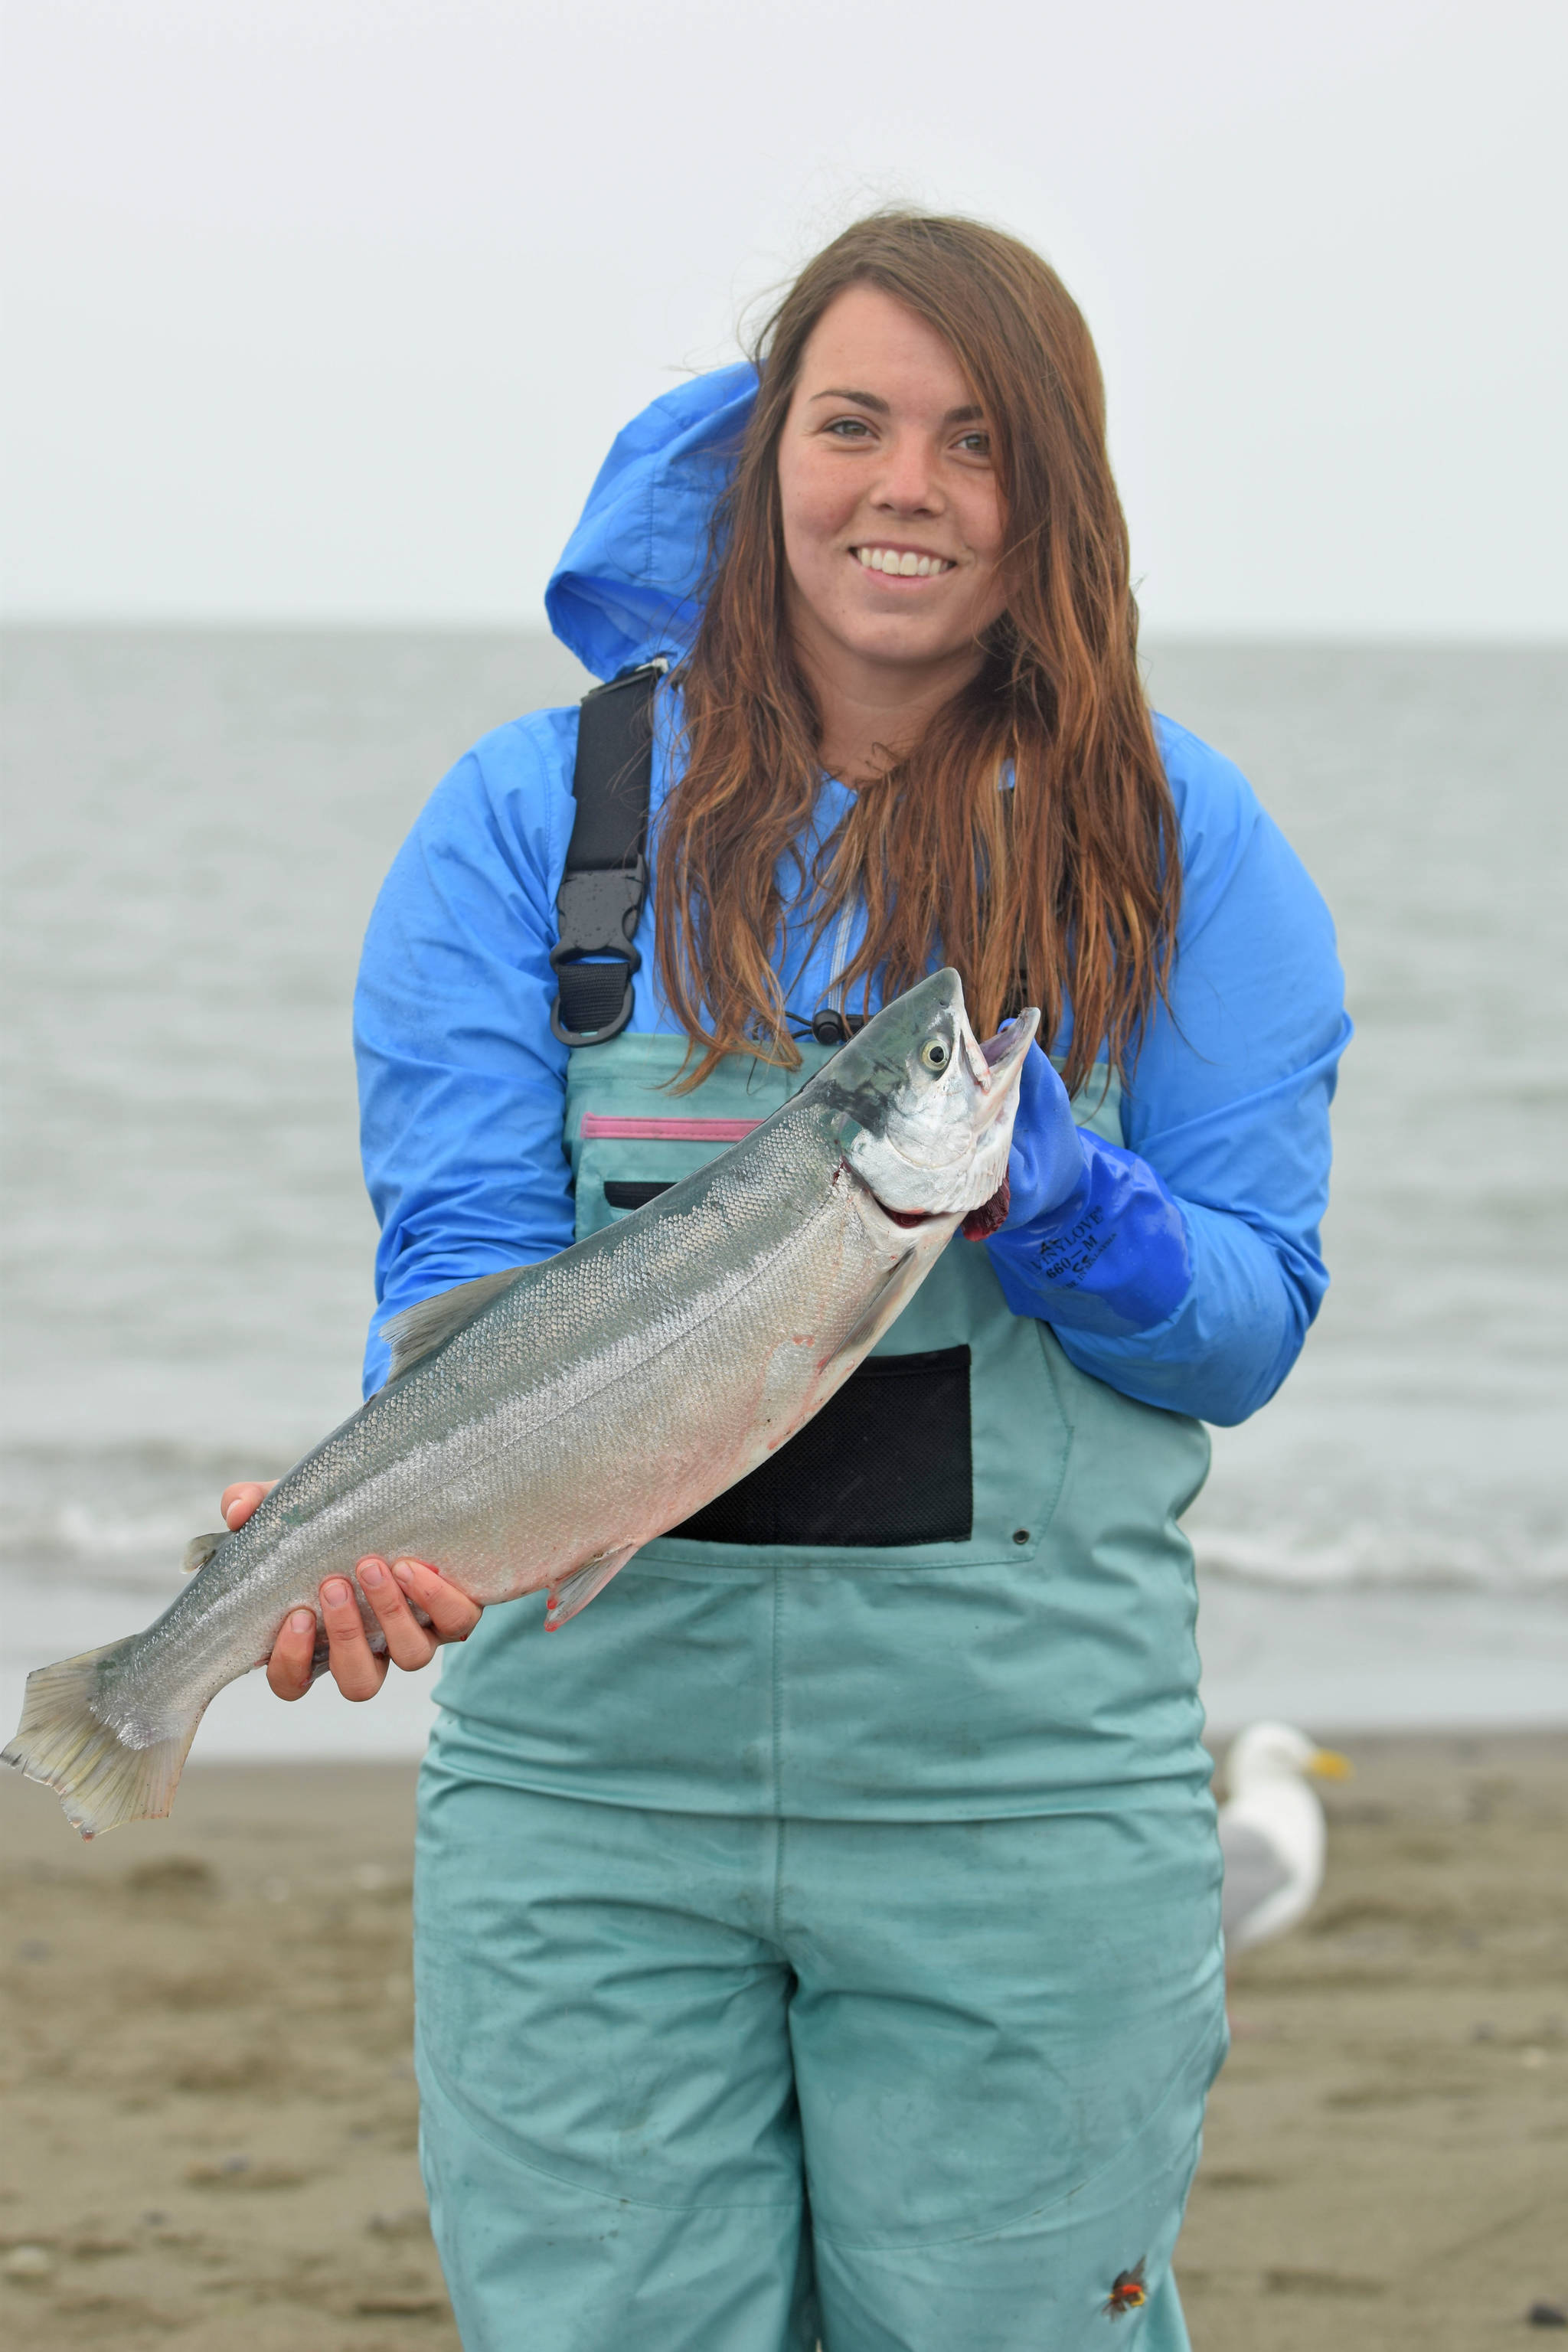 Alaina Hager shows off her catch on Kenai Beach during the first day of the three-week dipnetting season on July 10, 2018, in Kenai, Alaska. Hager, who was dipnetting for the first time, had caught two salmon and a flounder by mid-afternoon Tuesday. (Photo by Erin Thompson/Peninsula Clarion)